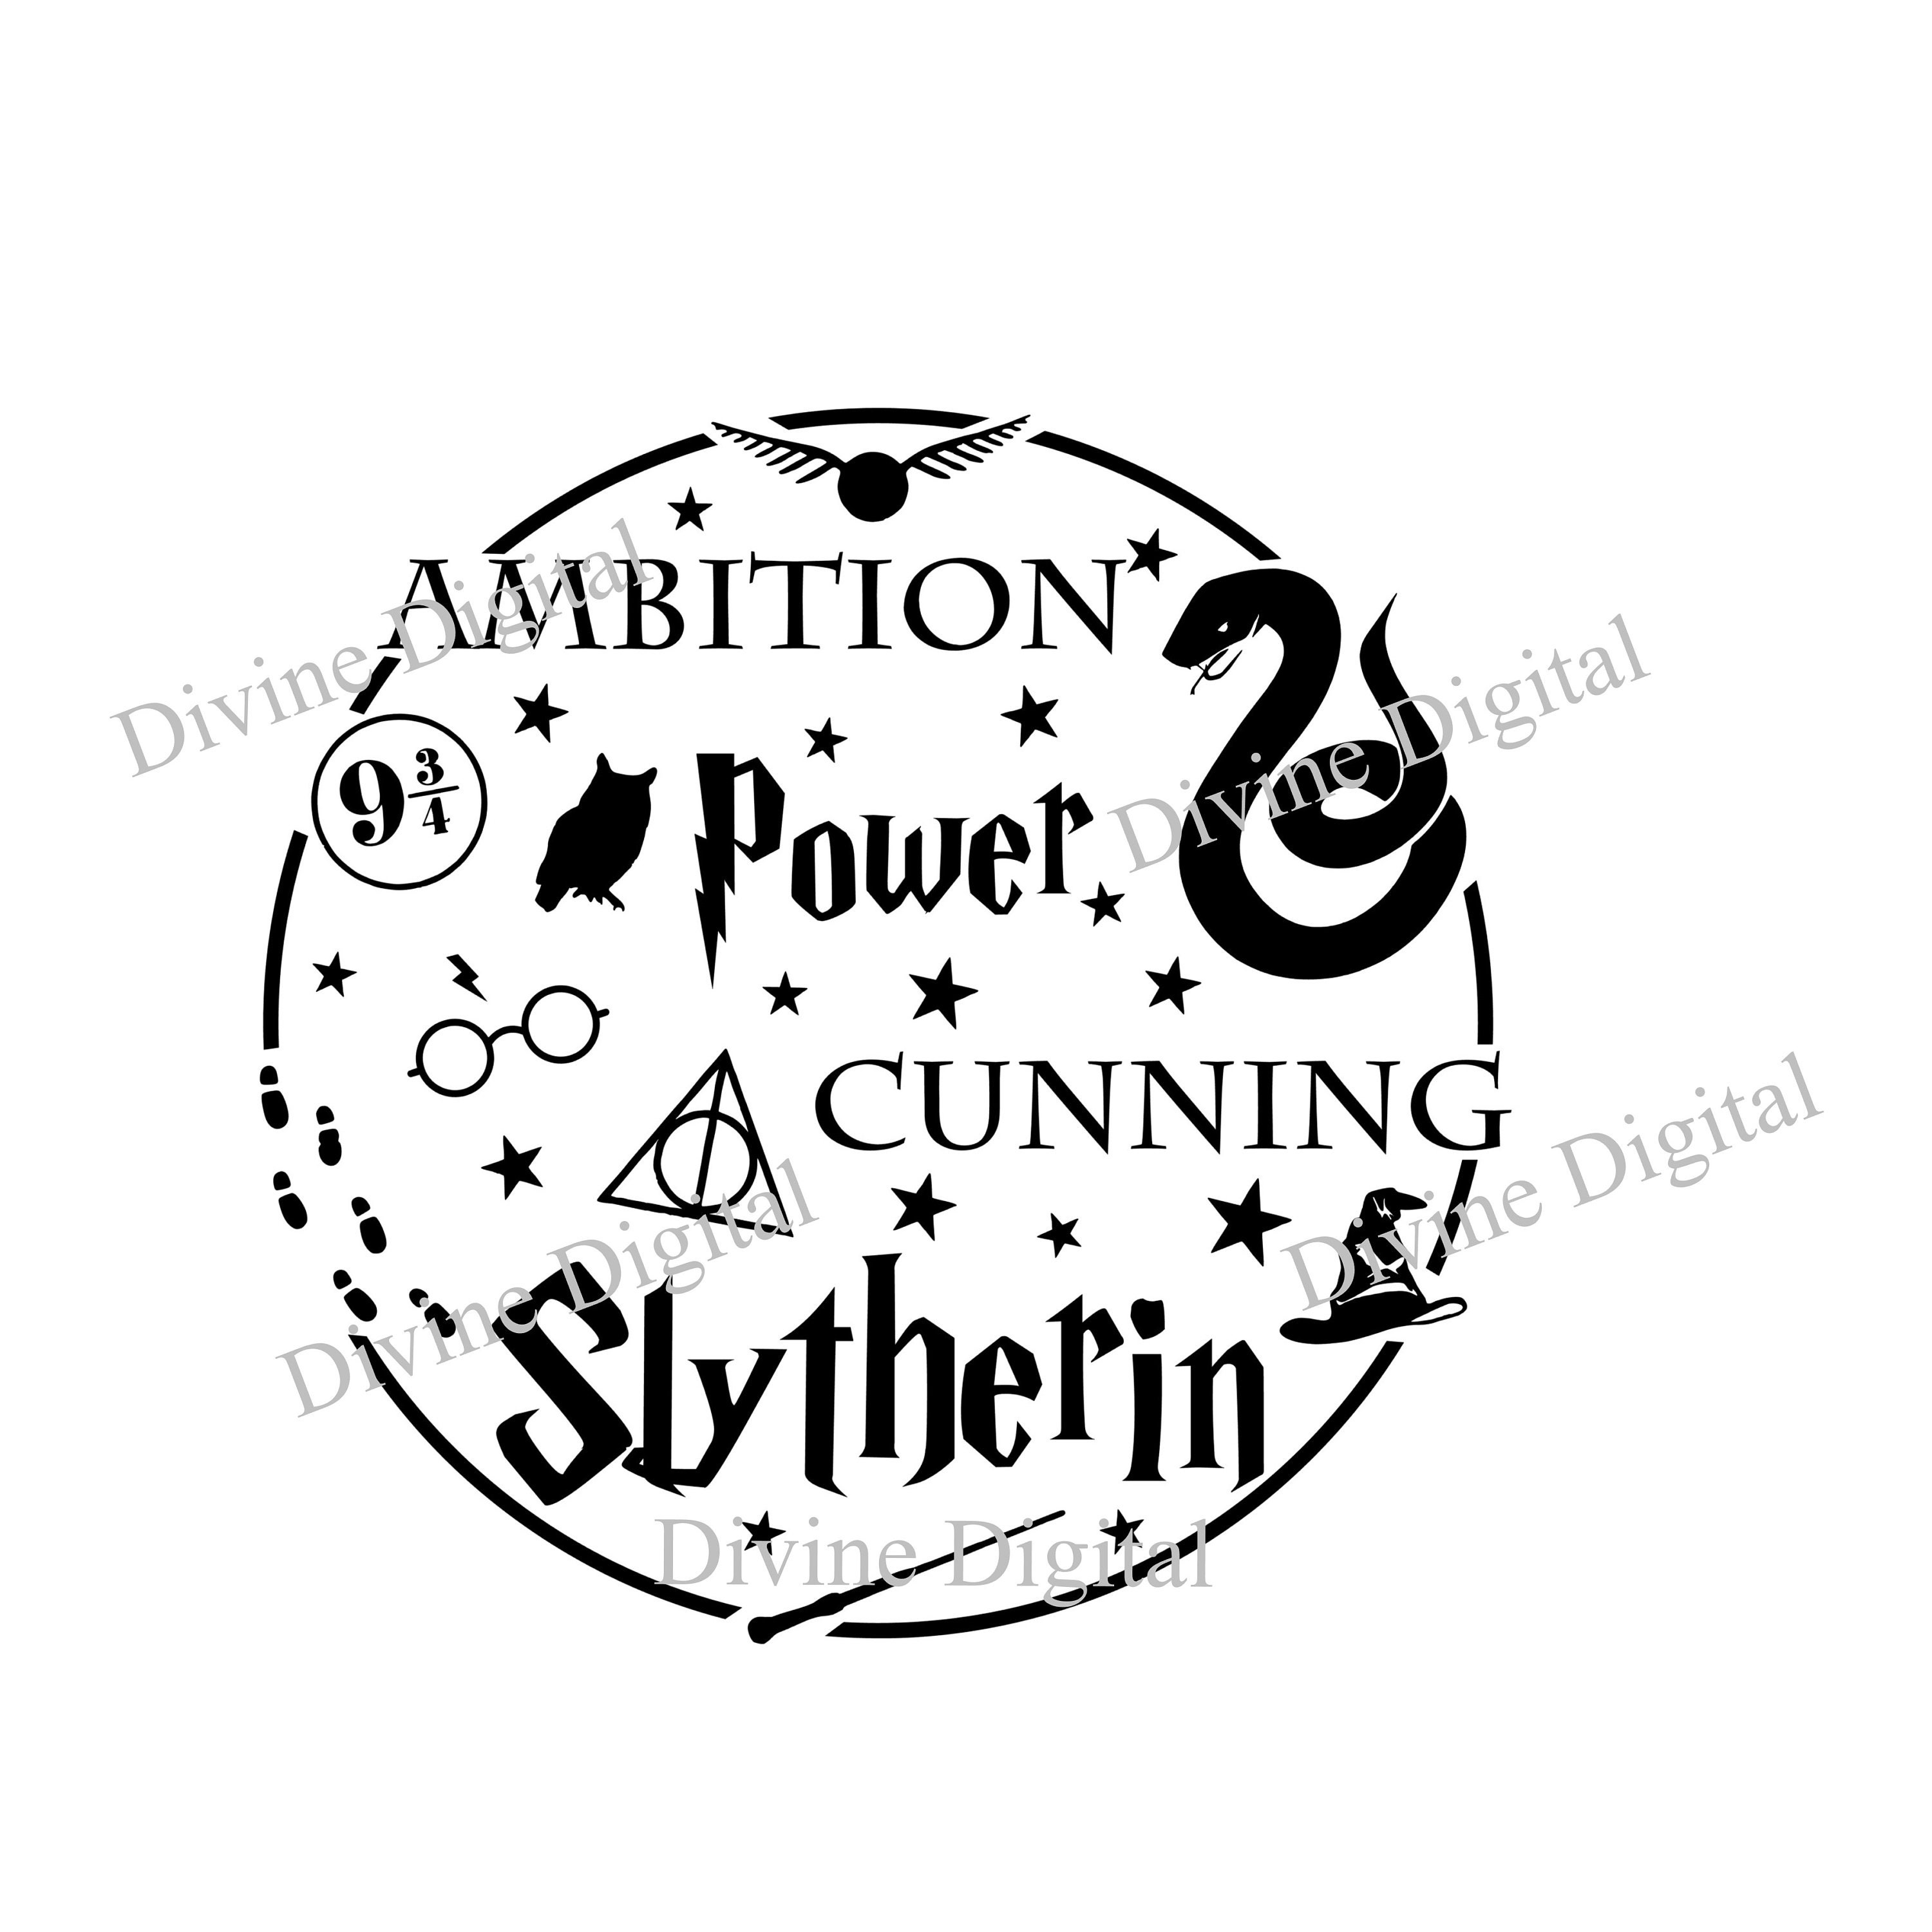 Ravenclaw HP Houses Word Bubble Shirt SVG File for Vinyl Cutting Machines  Silhouette Cricut Brother Scan N Cut